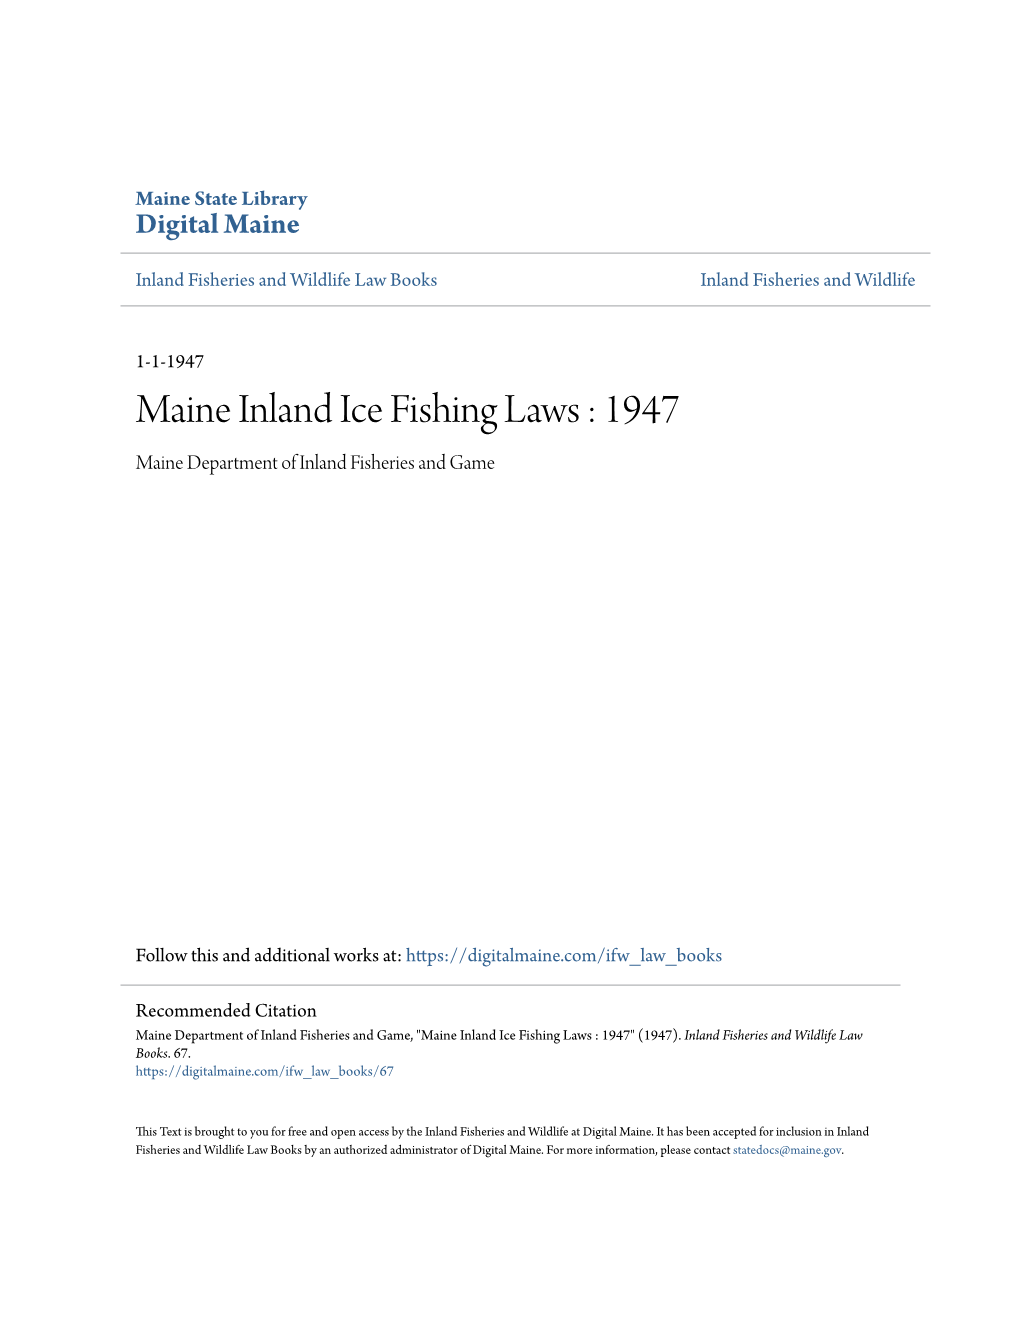 Maine Inland Ice Fishing Laws : 1947 Maine Department of Inland Fisheries and Game